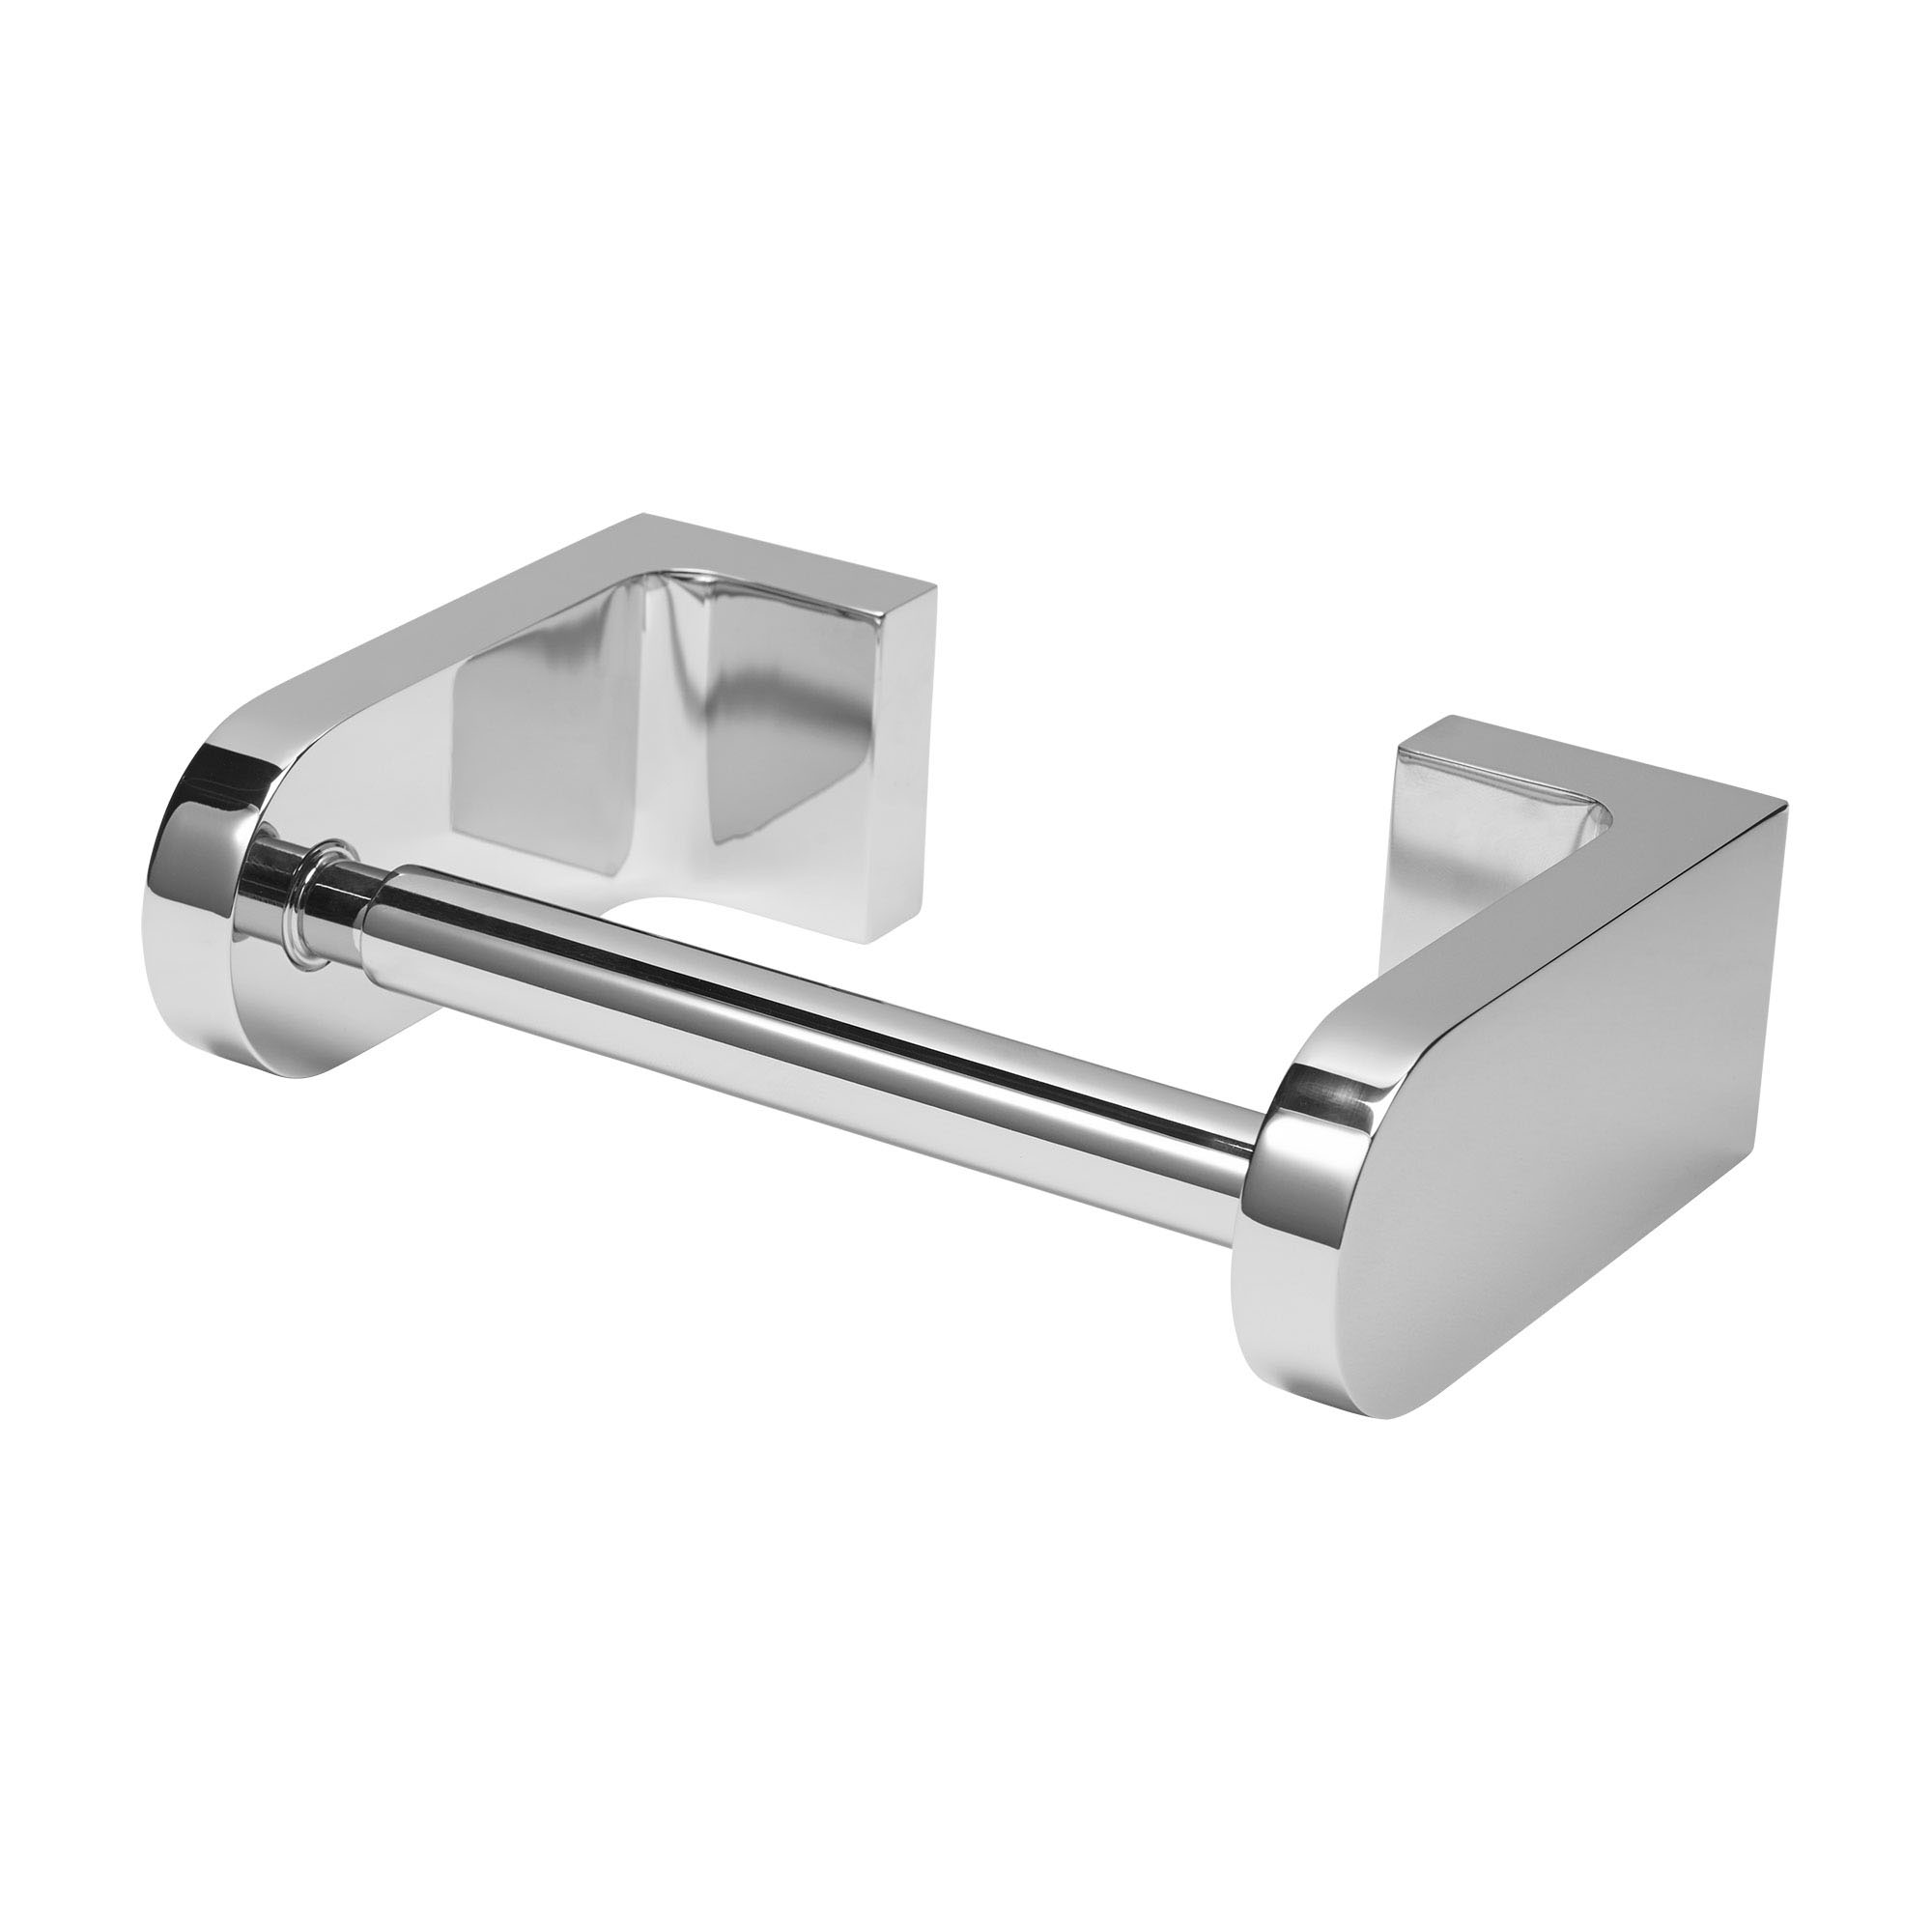 Equility® Toilet Paper Holder